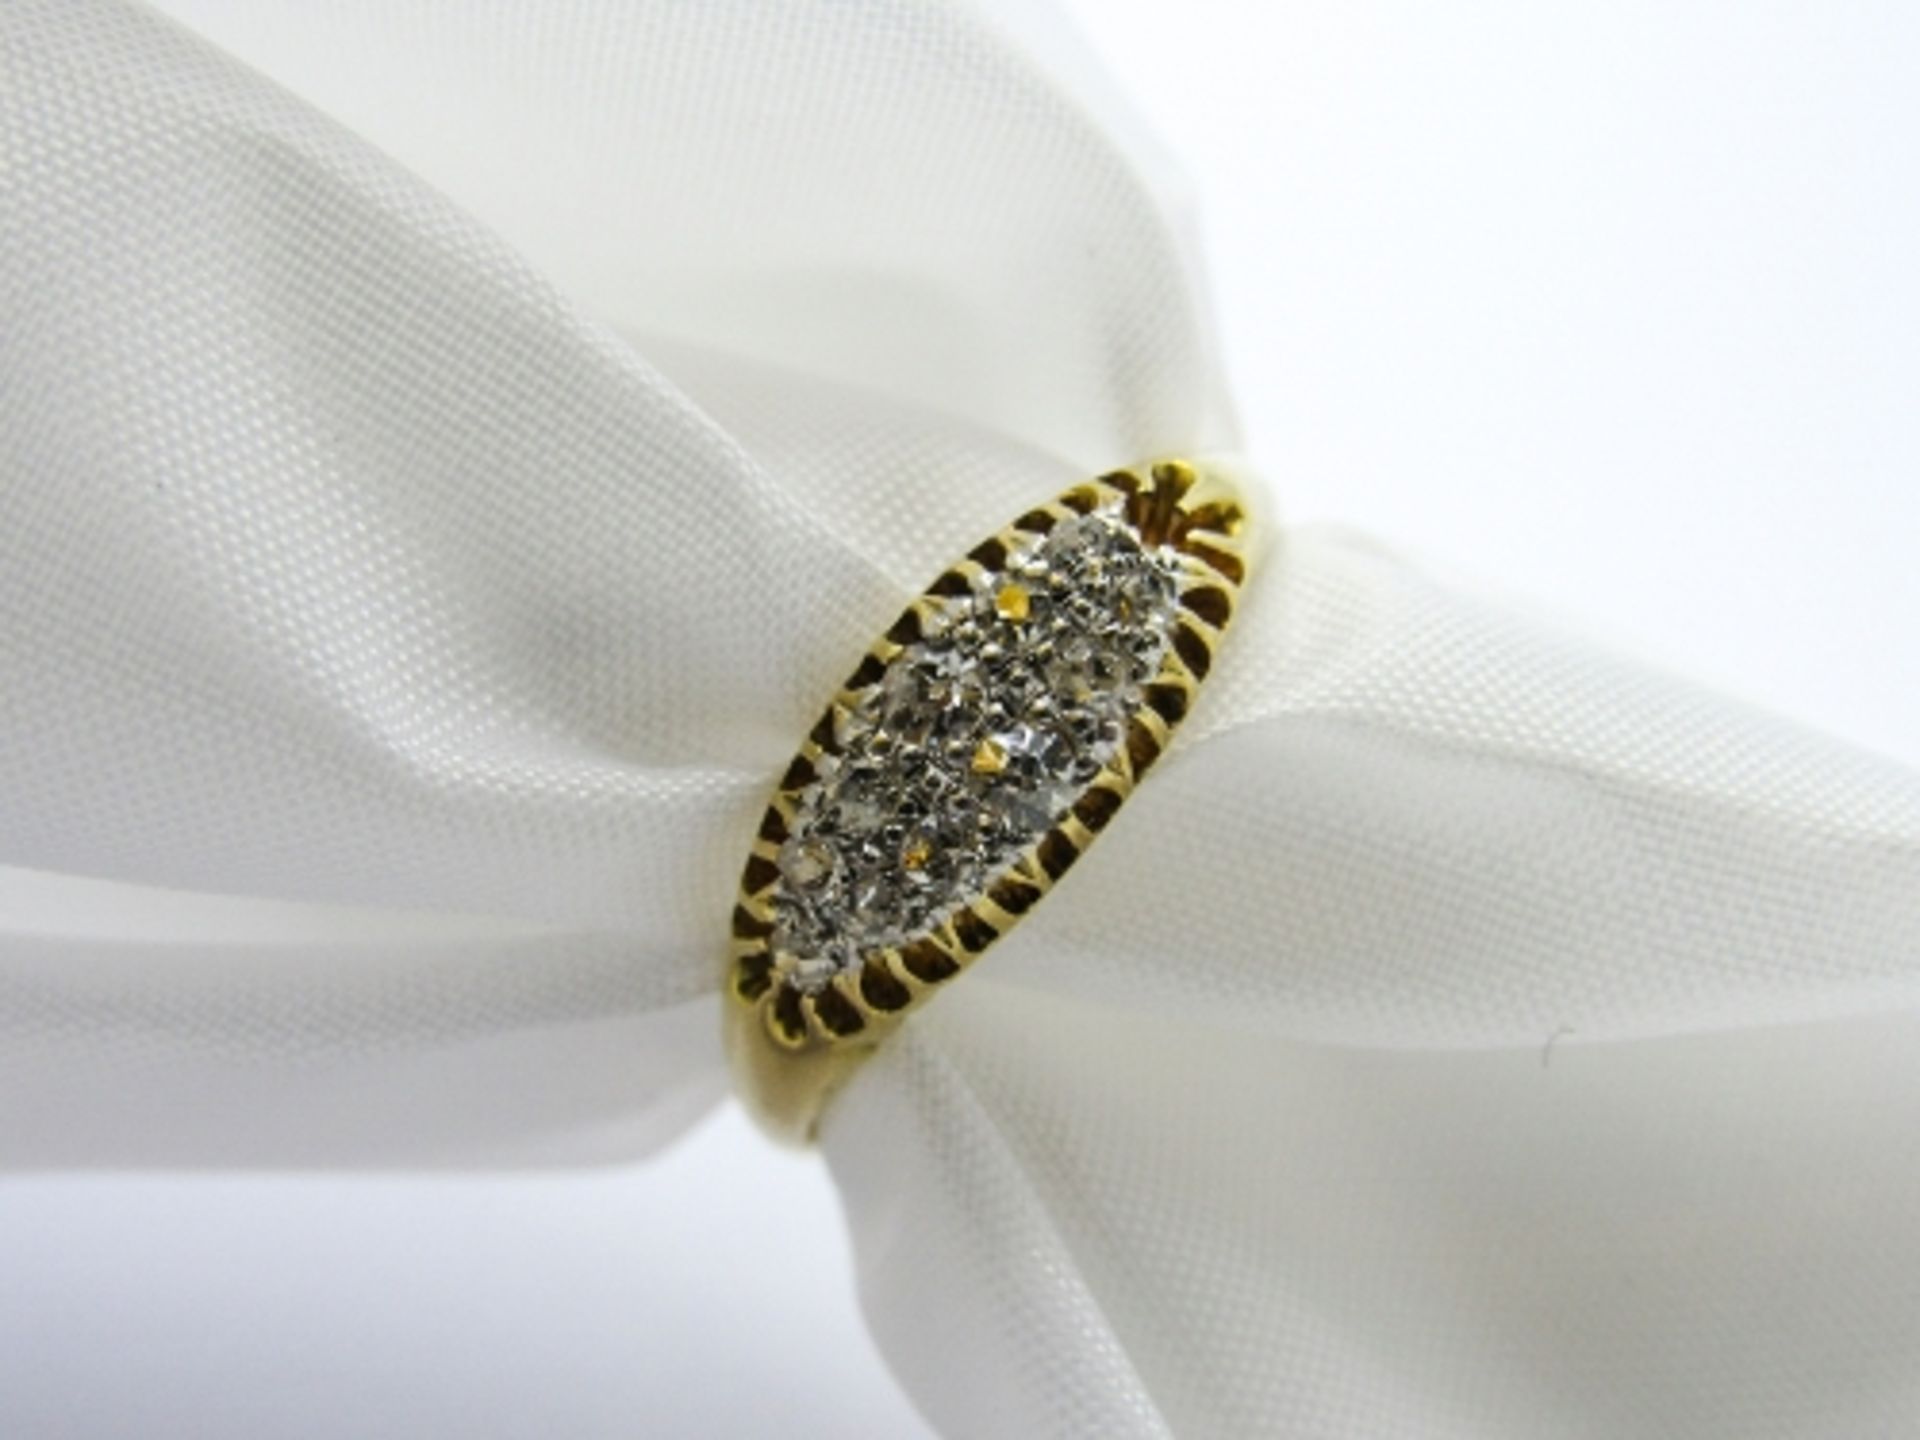 18ct gold diamond ring, weight 3.2gms, size O 1/2. Estimate £220-250